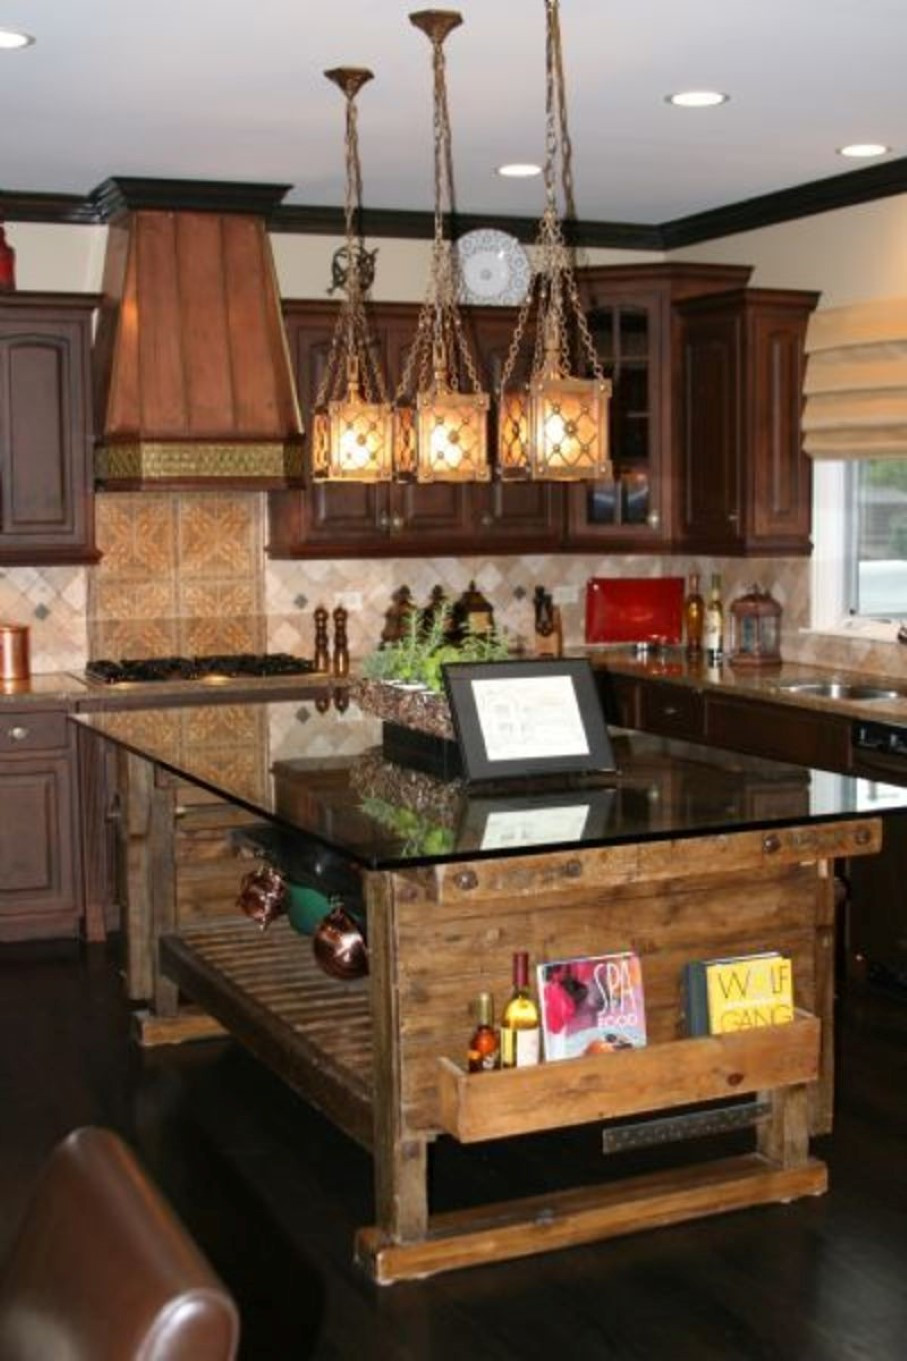 Rustic Country Kitchen
 Sweet Country Rustic Kitchen Idea – Designed to Own